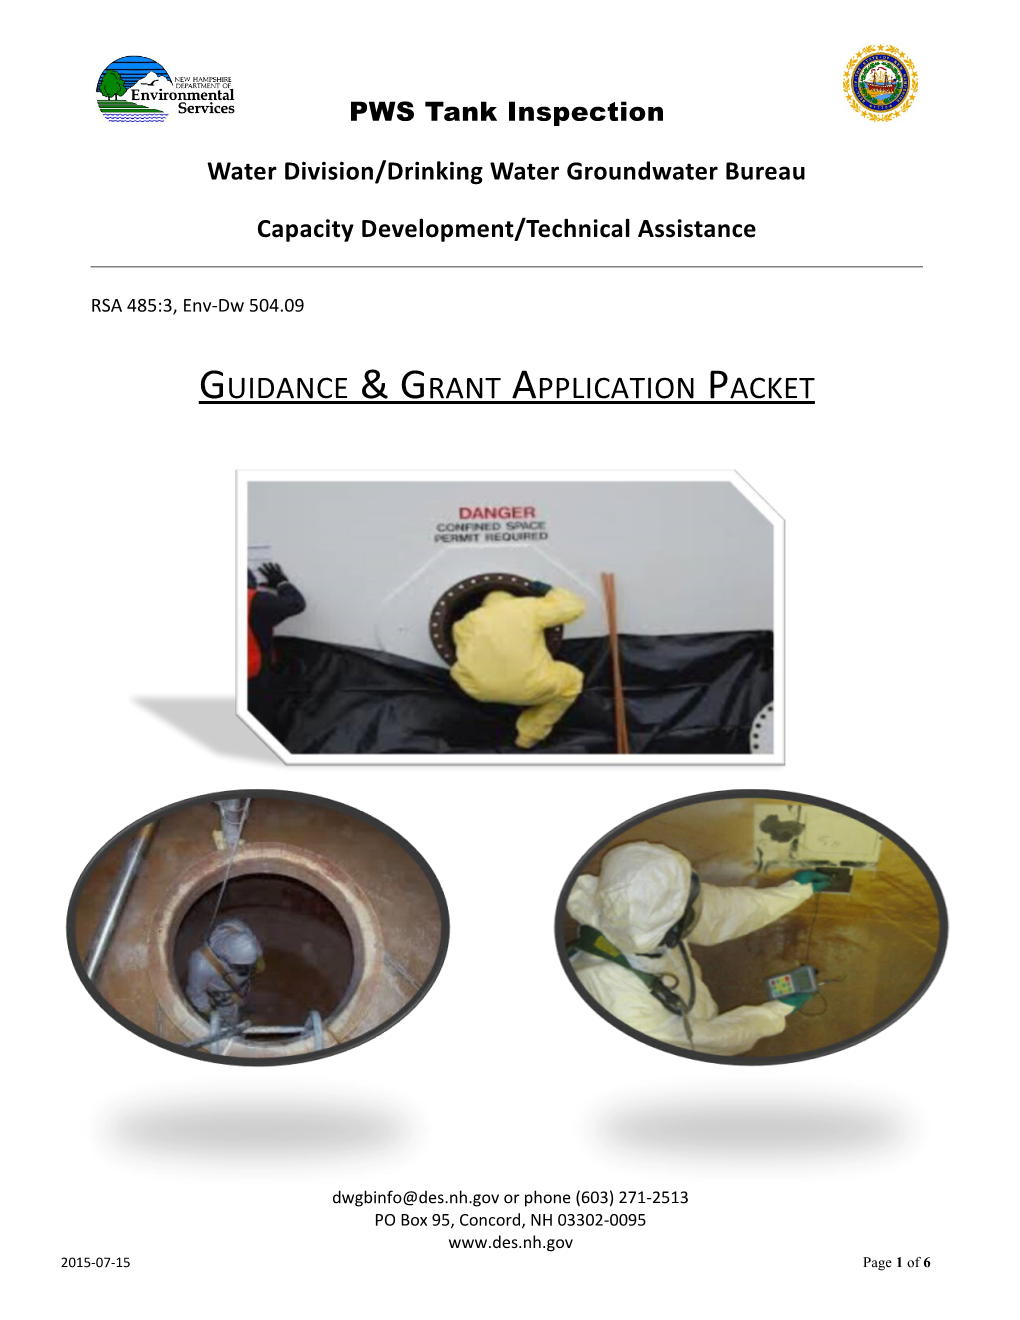 Water Division/Drinking Water Groundwater Bureau